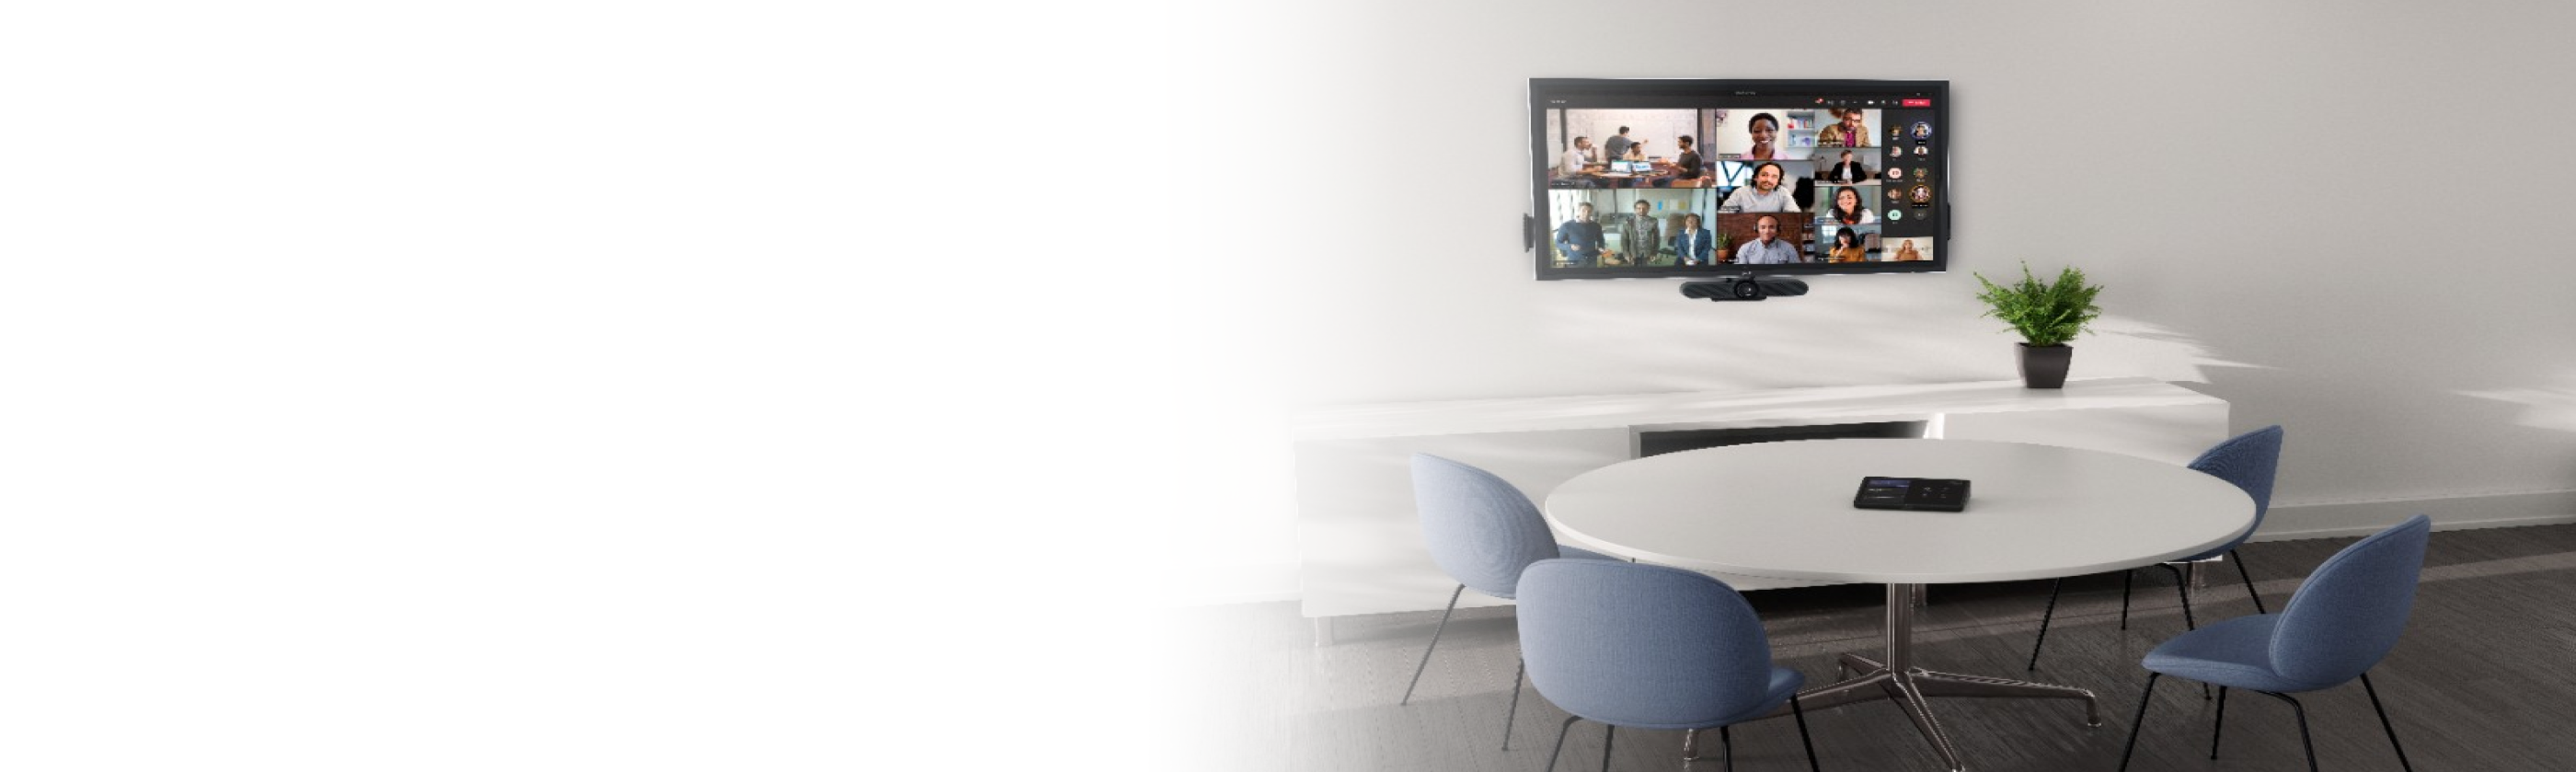 Dell OptiPlex + Logitech Meeting Space Solutions